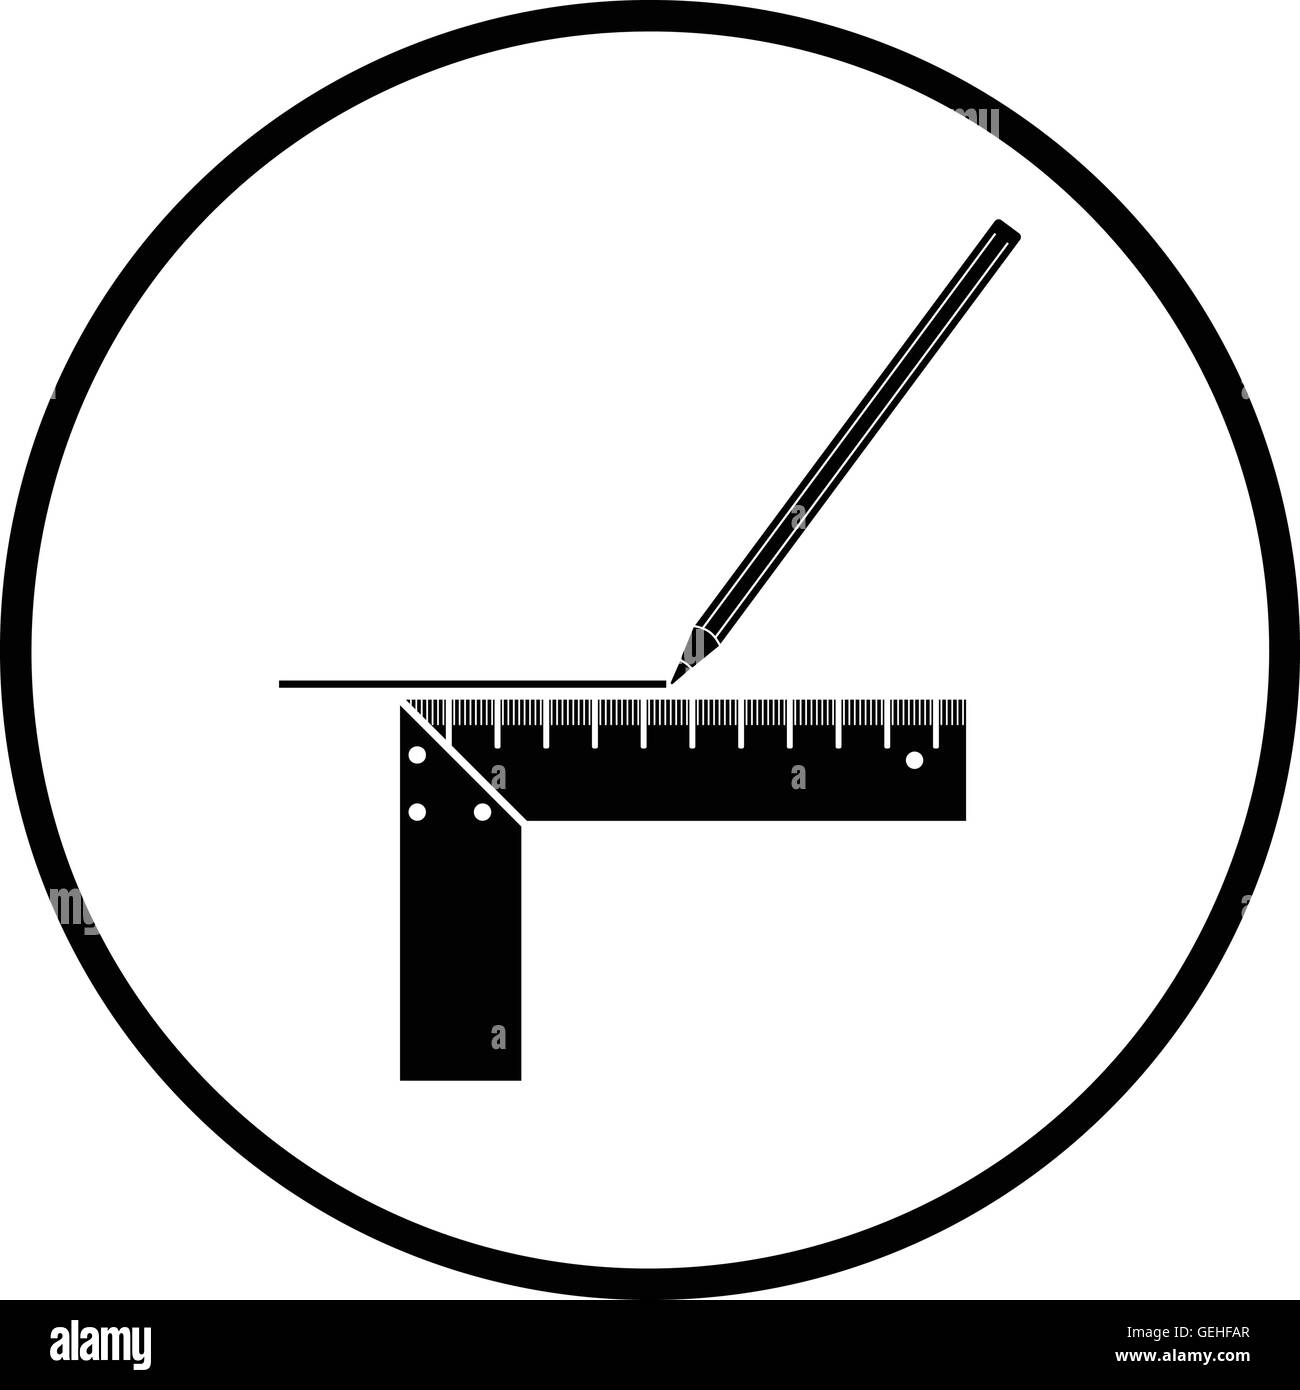 Pencil line with scale icon. Thin circle design. Vector illustration. Stock Vector